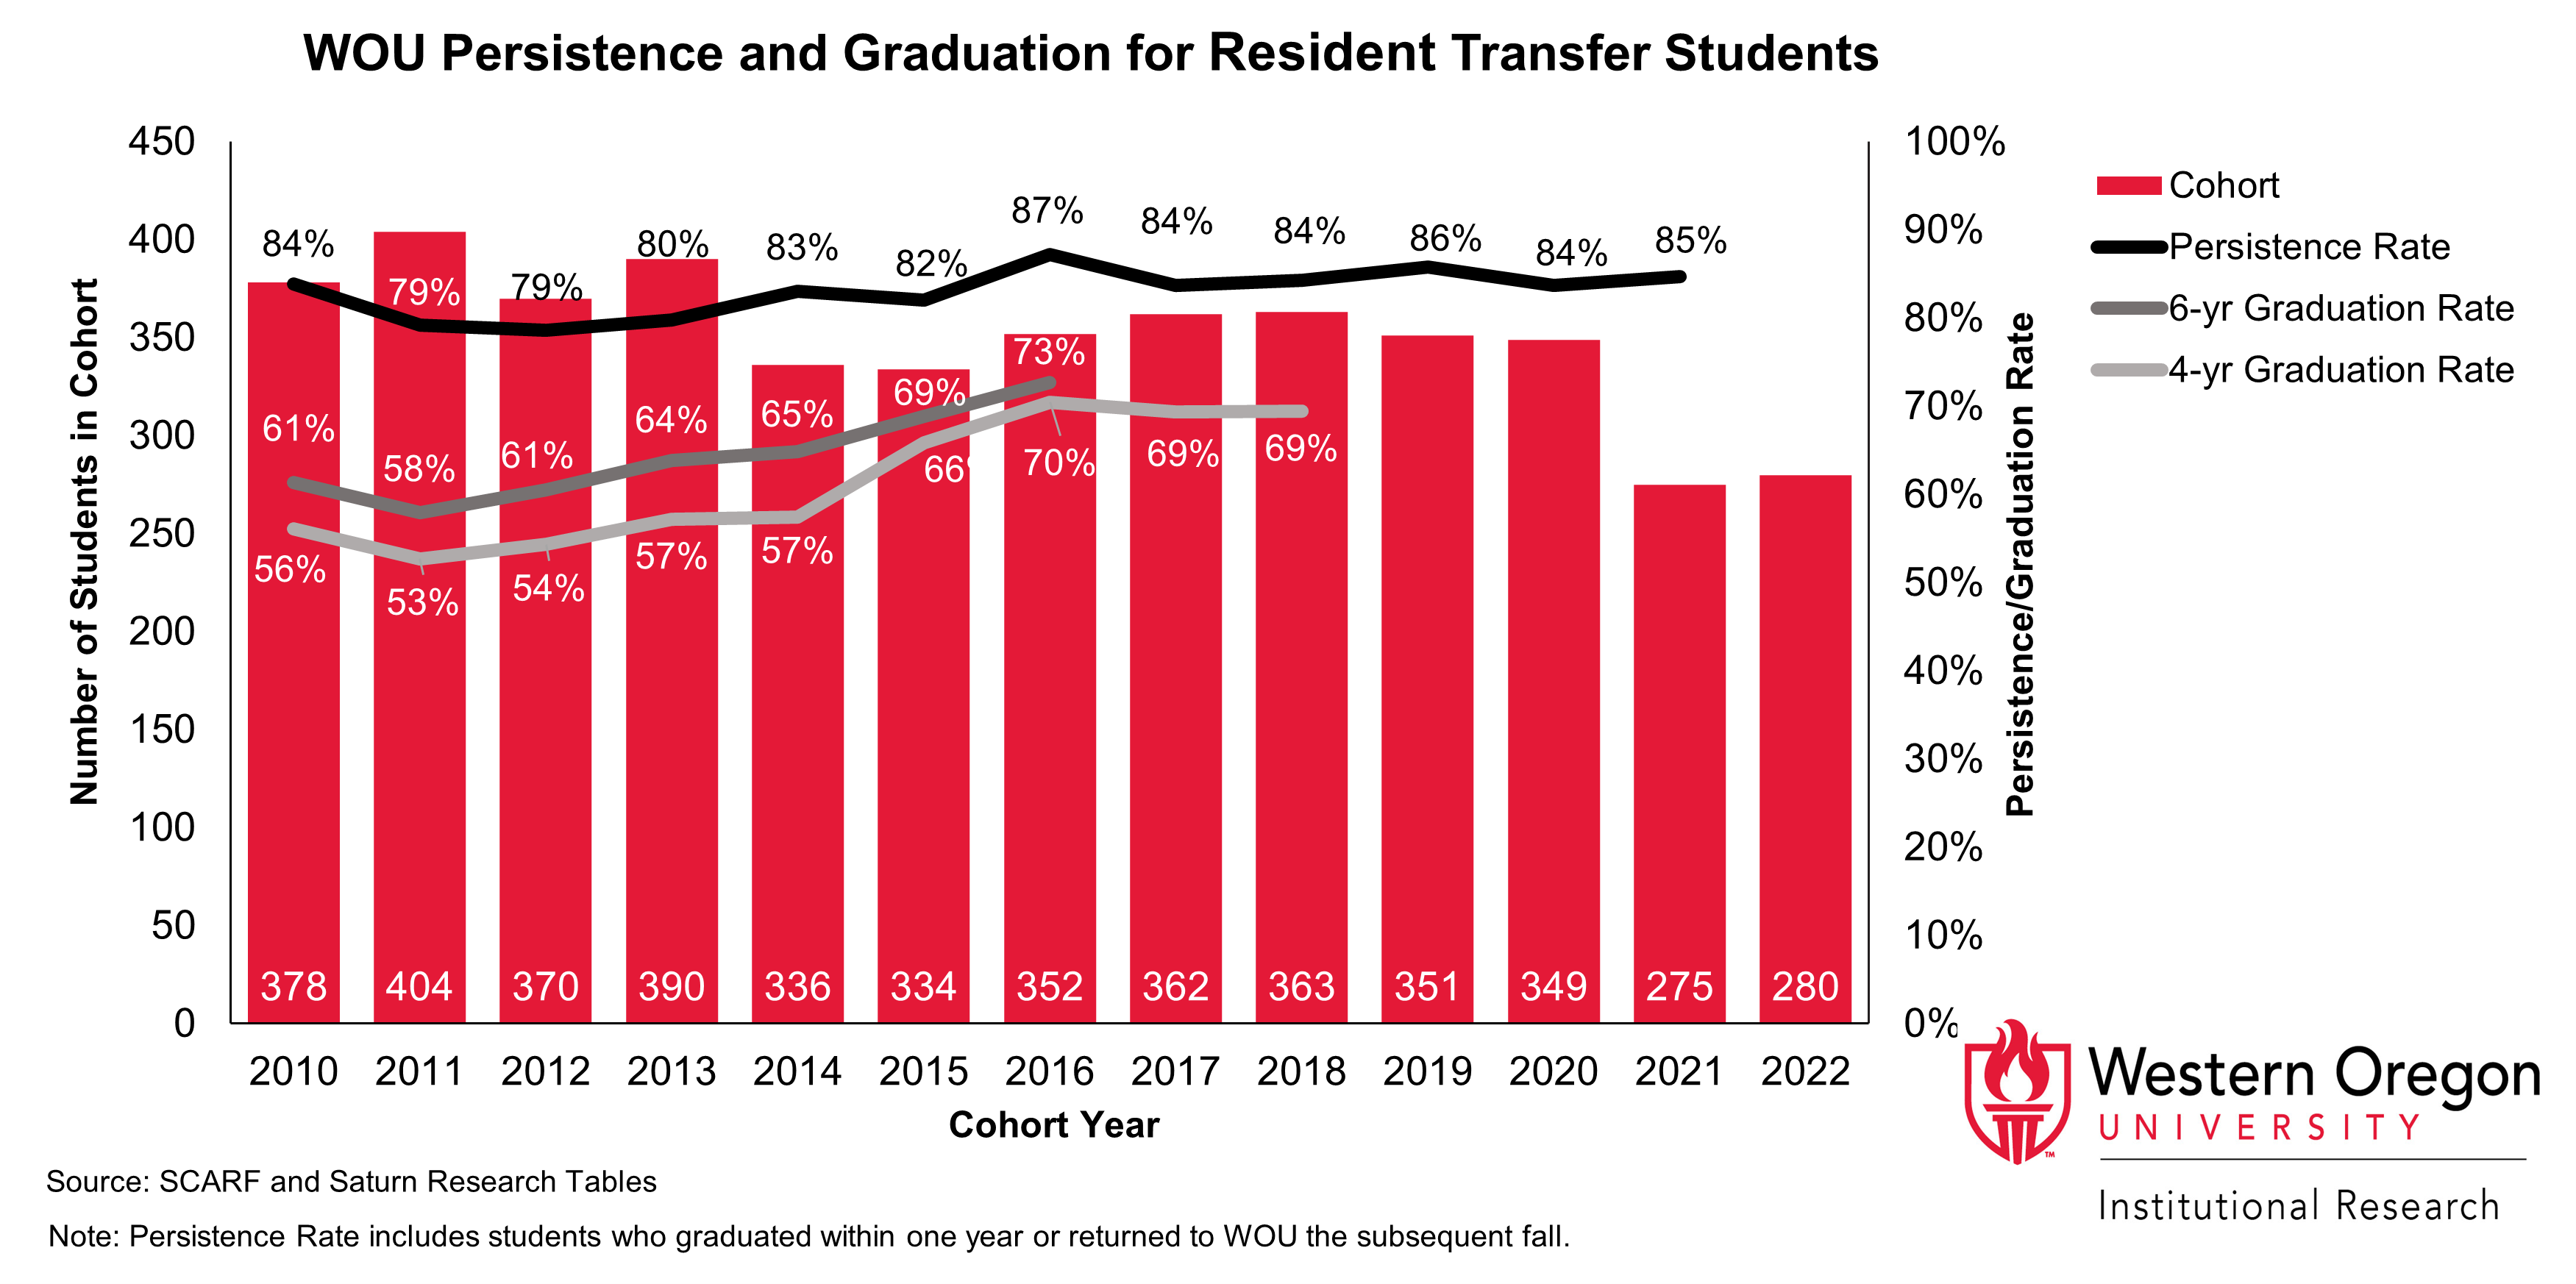 Bar and line graph of retention and 4- and 6-year graduation rates since 2010 for WOU transfer students that are Oregon residents, showing that graduation rates have been steadily increasing while persistance rates have remained largely stable